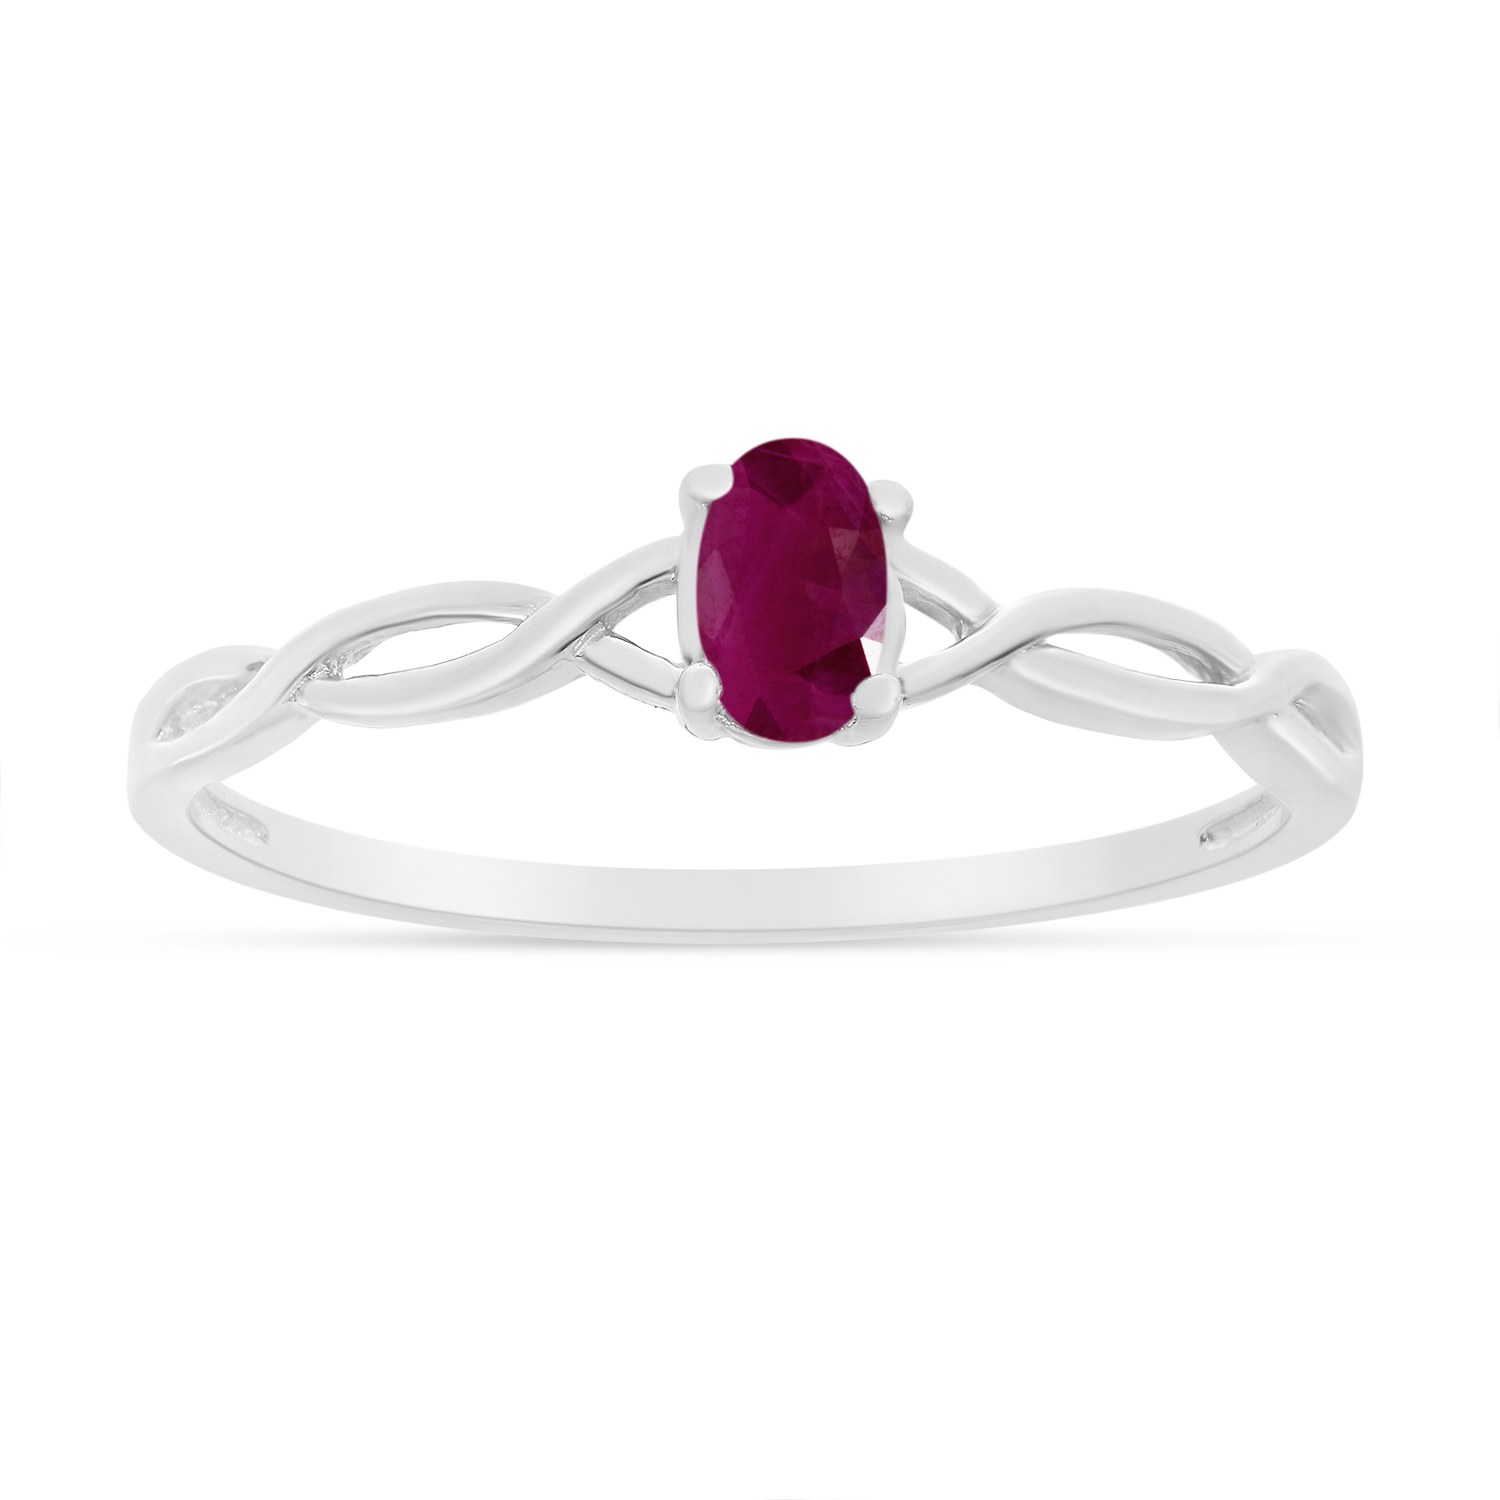 Direct-Jewelry 10k White Gold Oval Ruby Ring